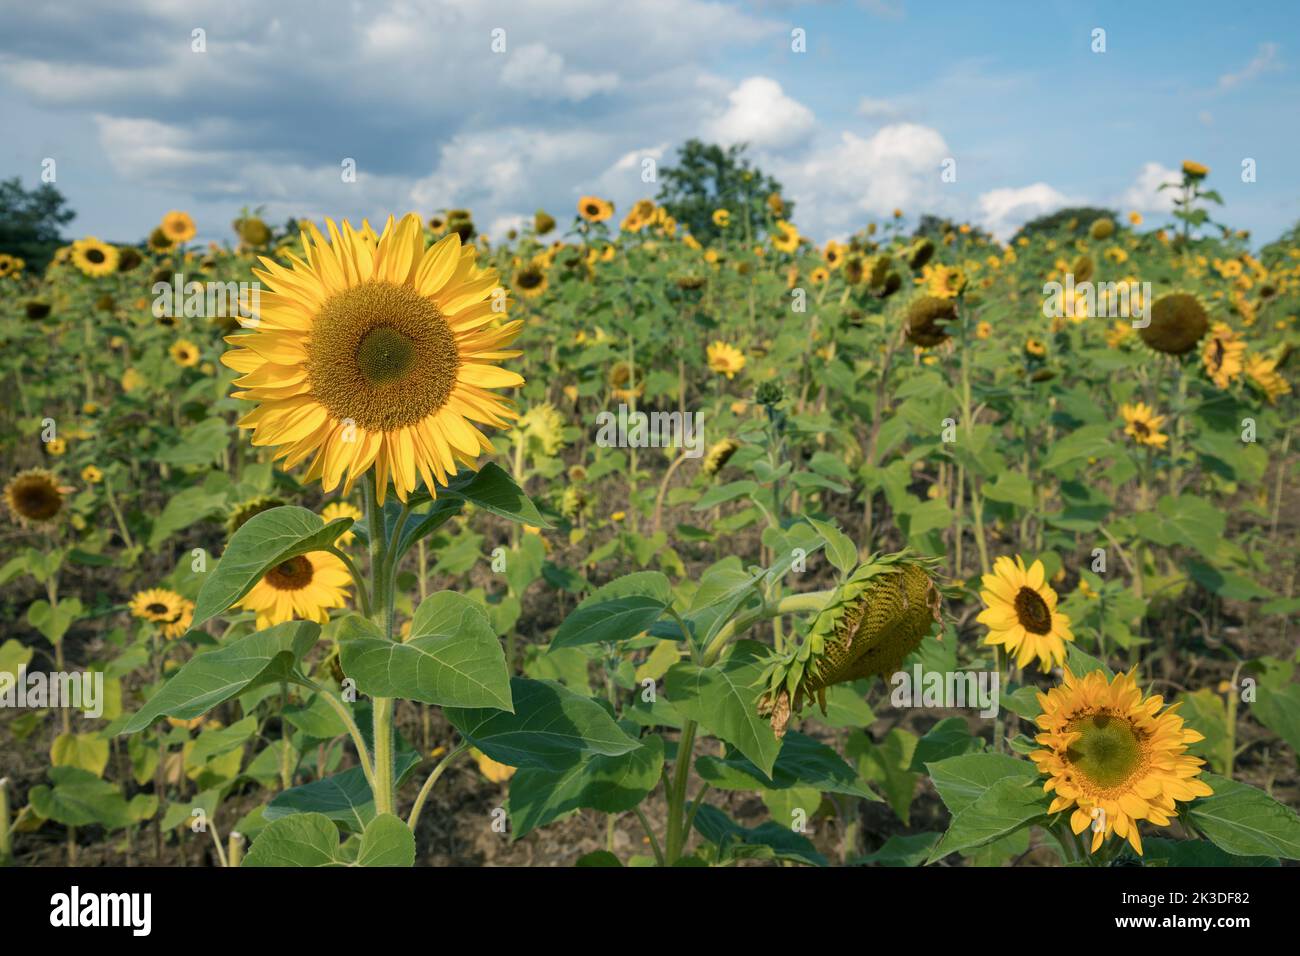 Sunflowers field over blue bright sky background Stock Photo